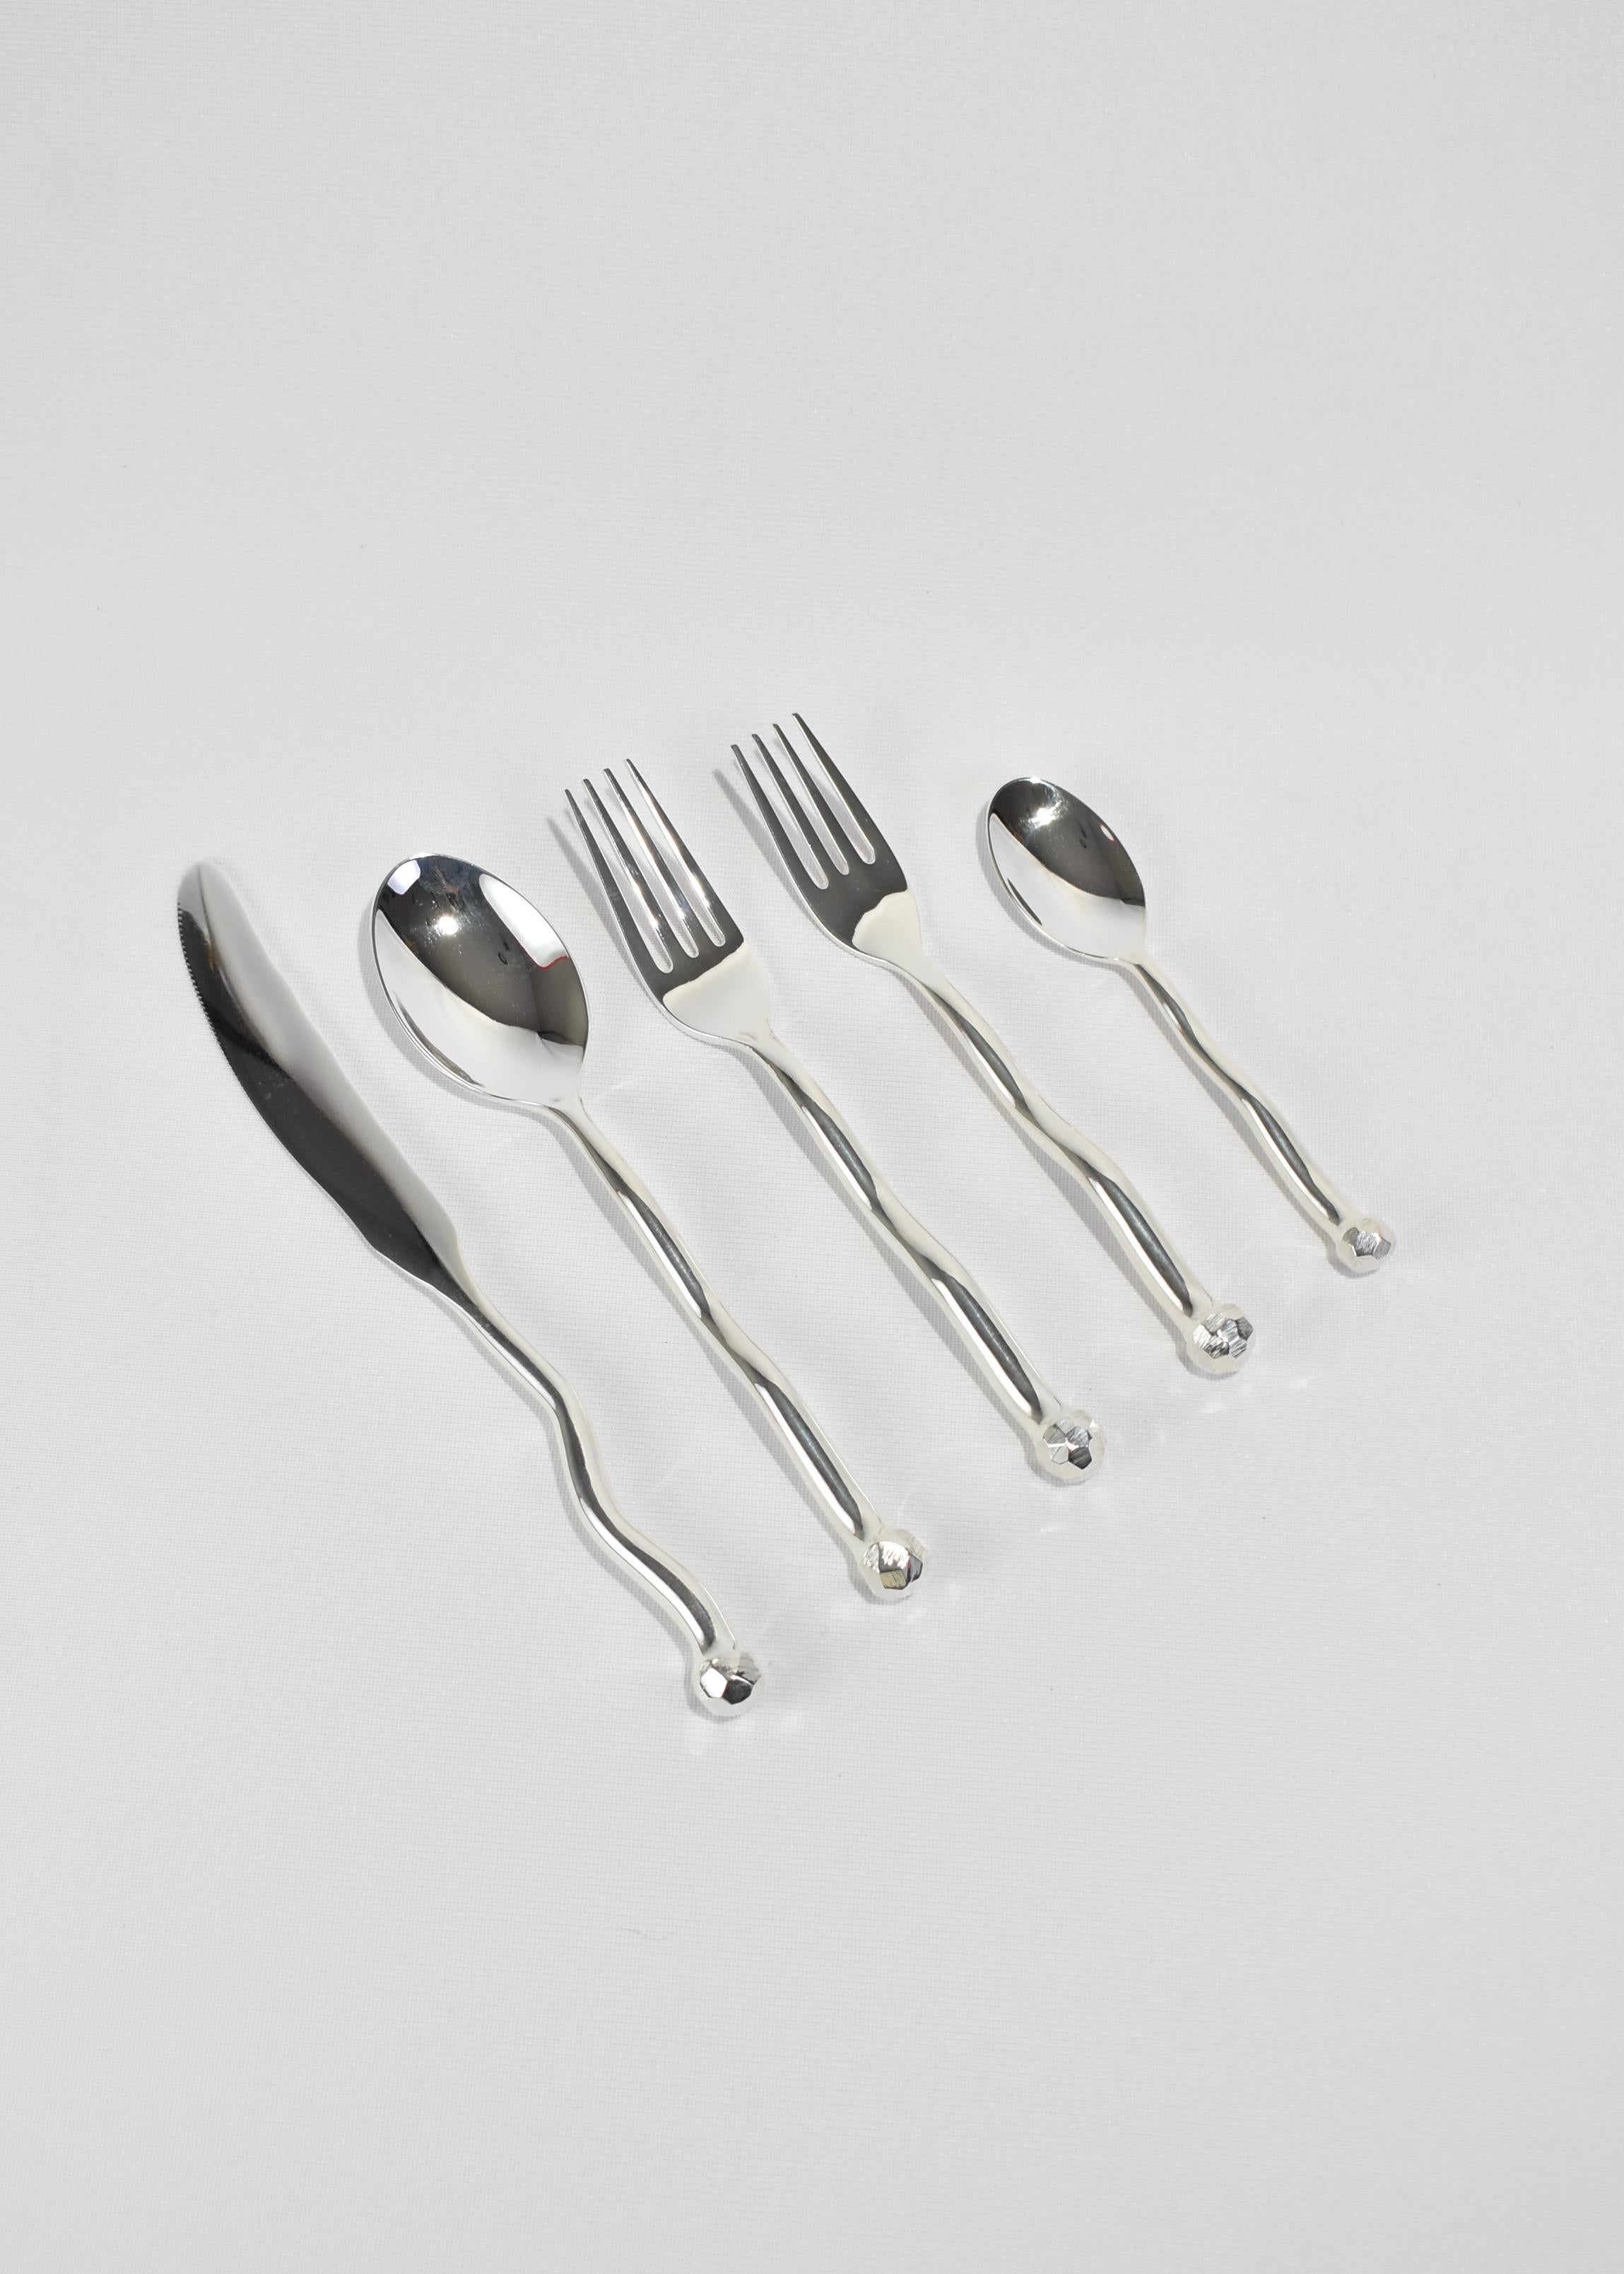 The re-issued 5 piece Sphere flatware set in silver plate by Izabel Lam. Each piece features an undulating handle and hammered textured knob on end. Impressed above knob on underside of handle: 'IZABEL LAM'. 

Originally designed in the late 1980s